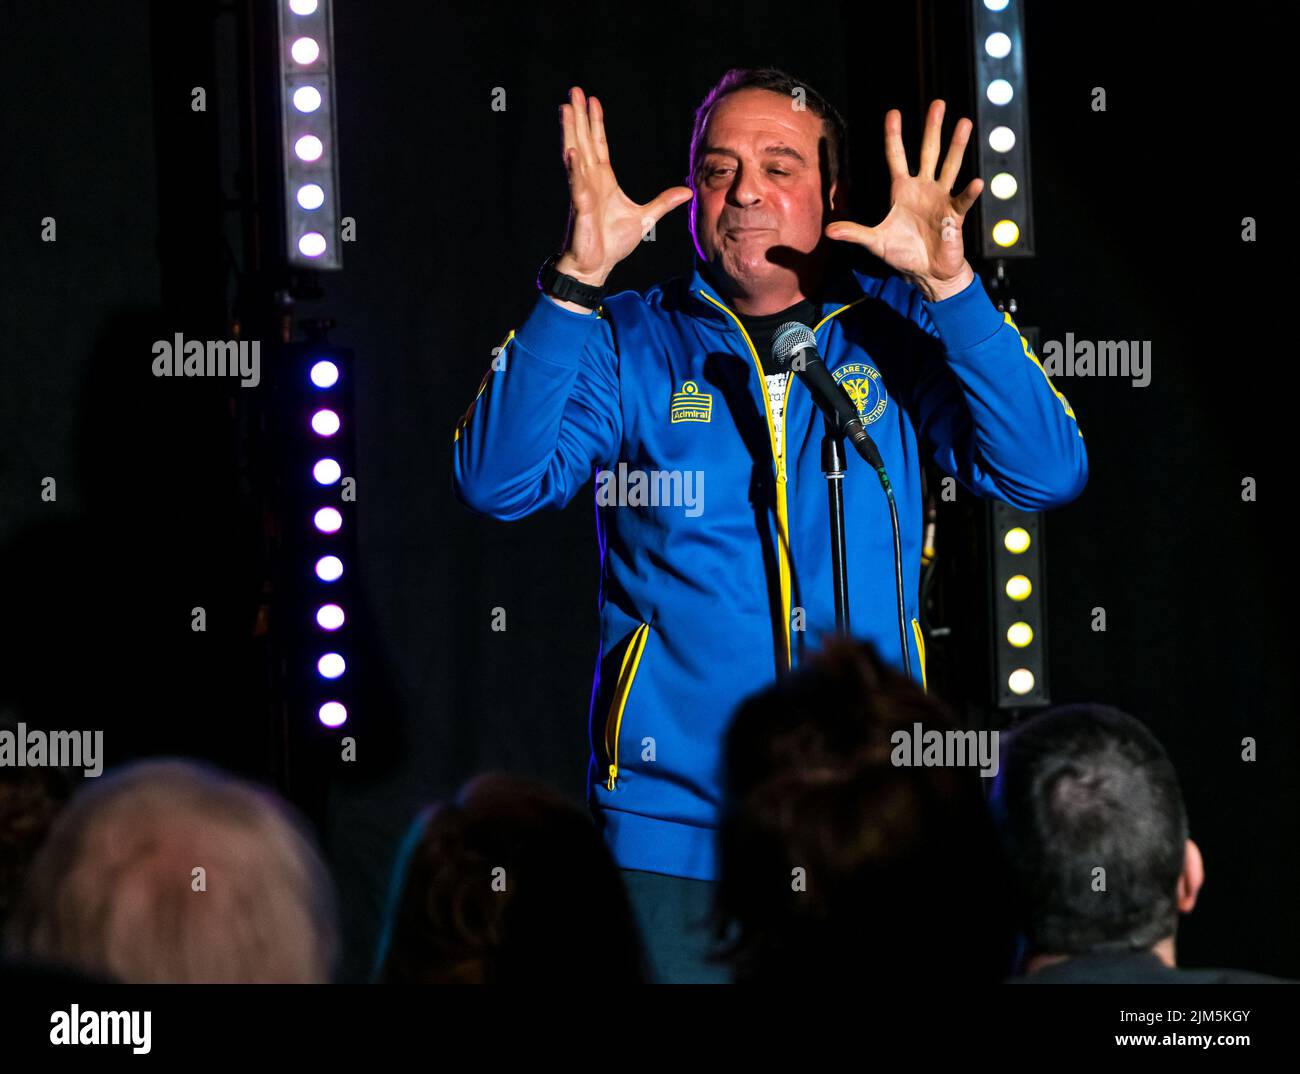 Edinburgh, Scotland, United Kingdom, 4th August 2022. Edinburgh Festival Fringe: The Stand Comedy Club presents a showcase of the comedic talent on offer at this year's Fringe at the New Town Theatre. Pictured: Mark Thomas.  Credit: Sally Anderson/Alamy Live News Stock Photo